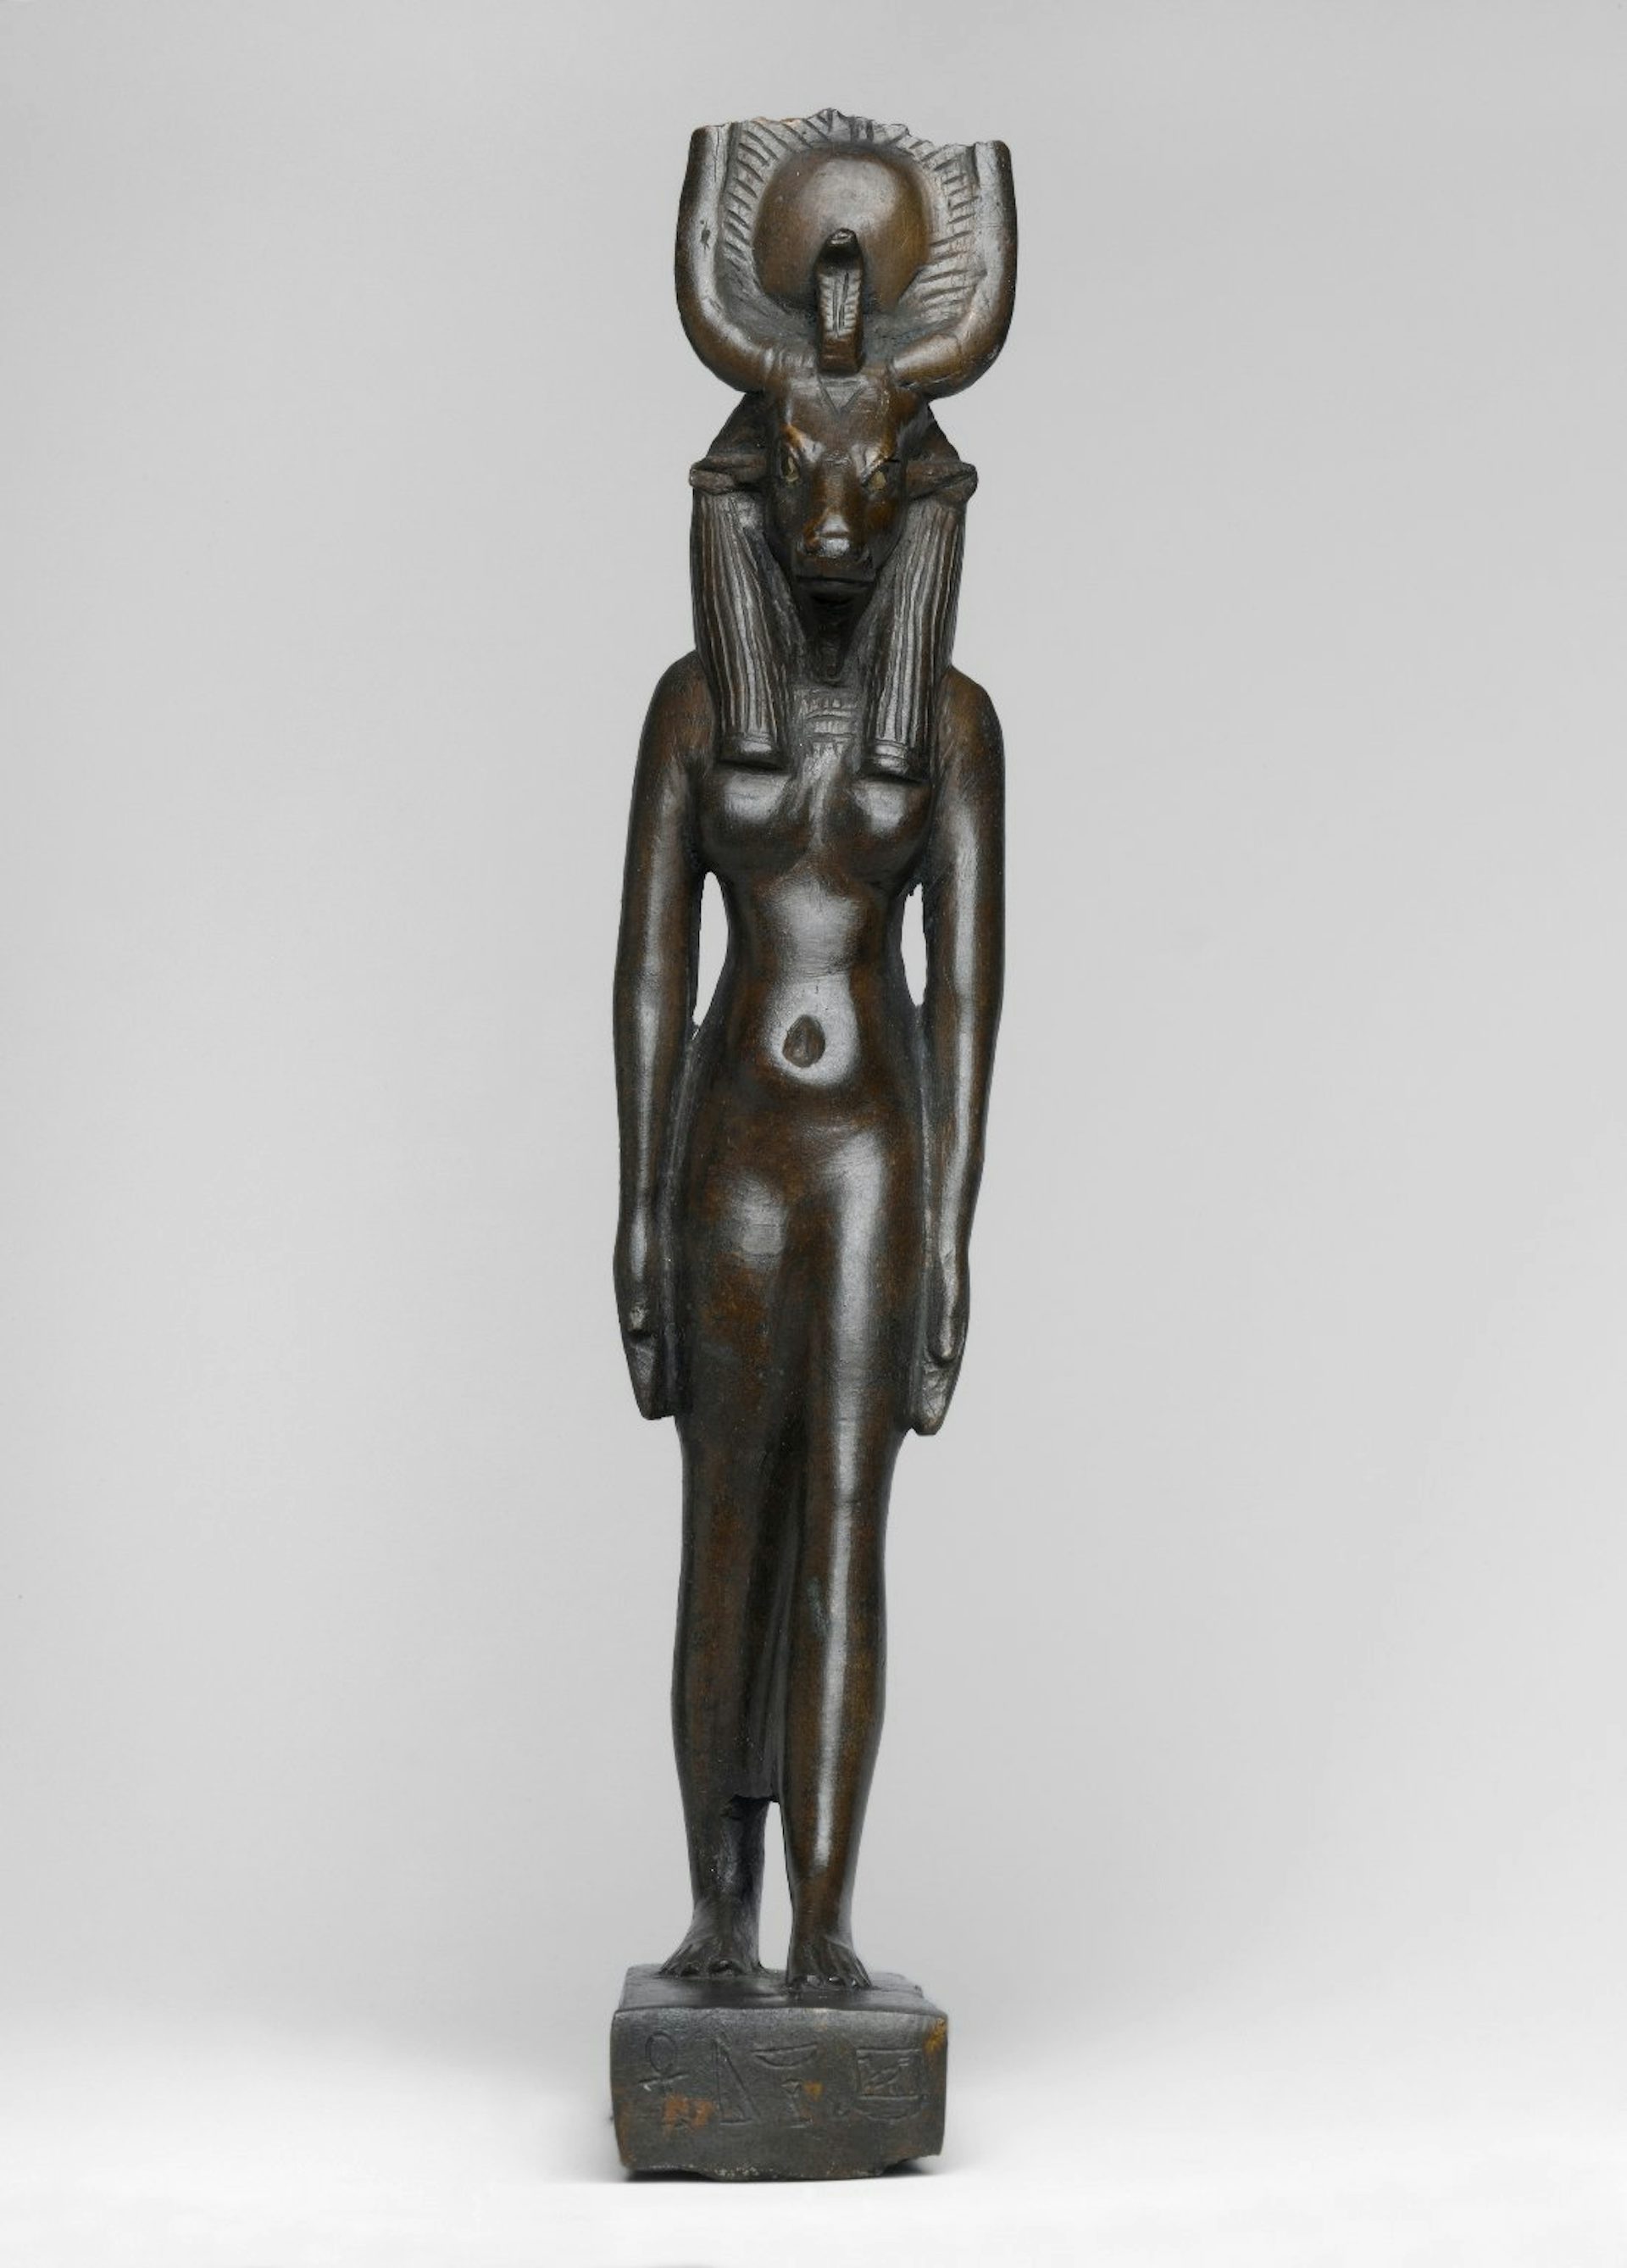 Statuette of cow-headed Hathor made of bronze.